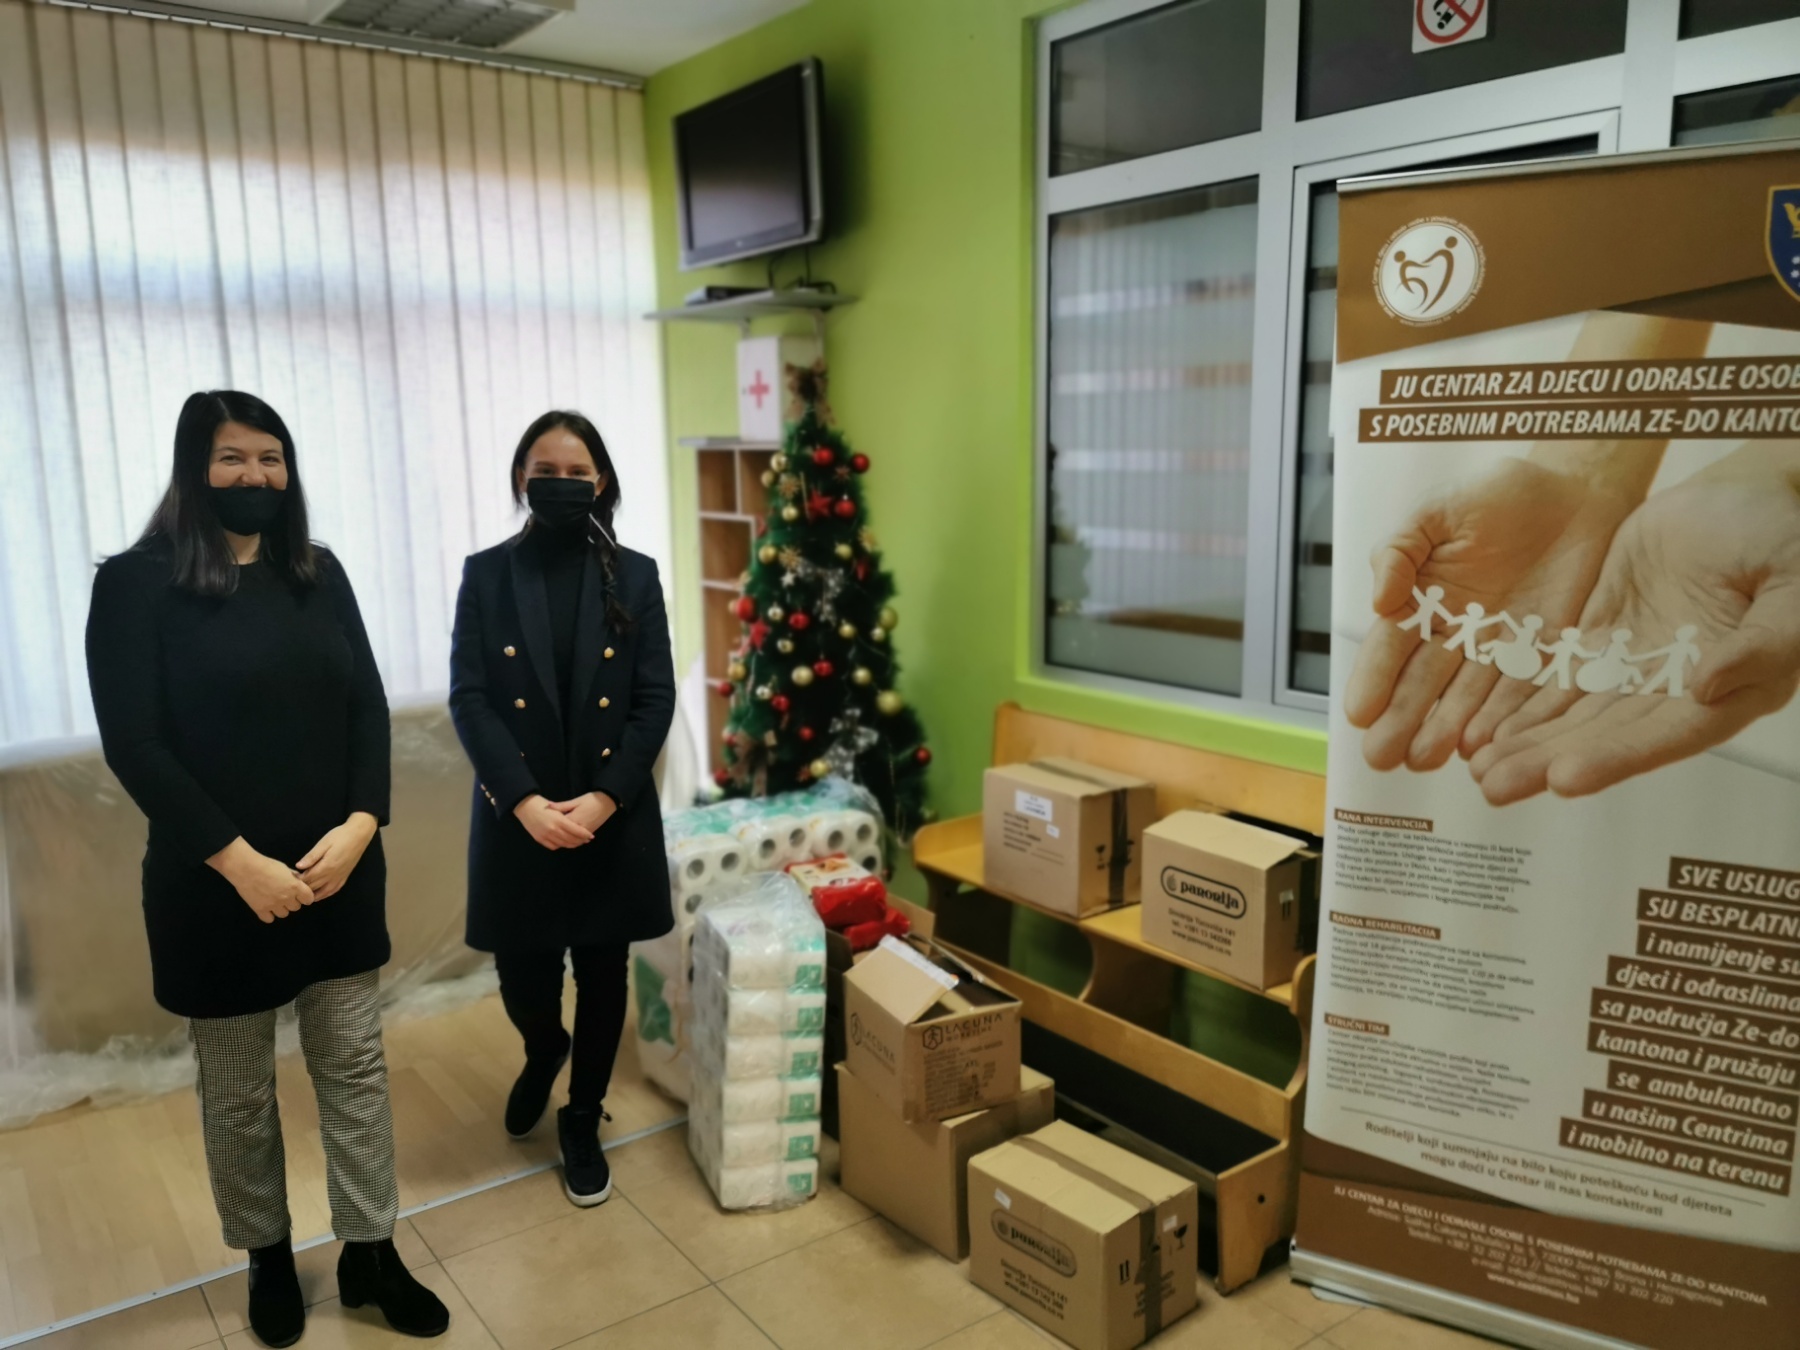 Two women in masks, standing next to piles of donations